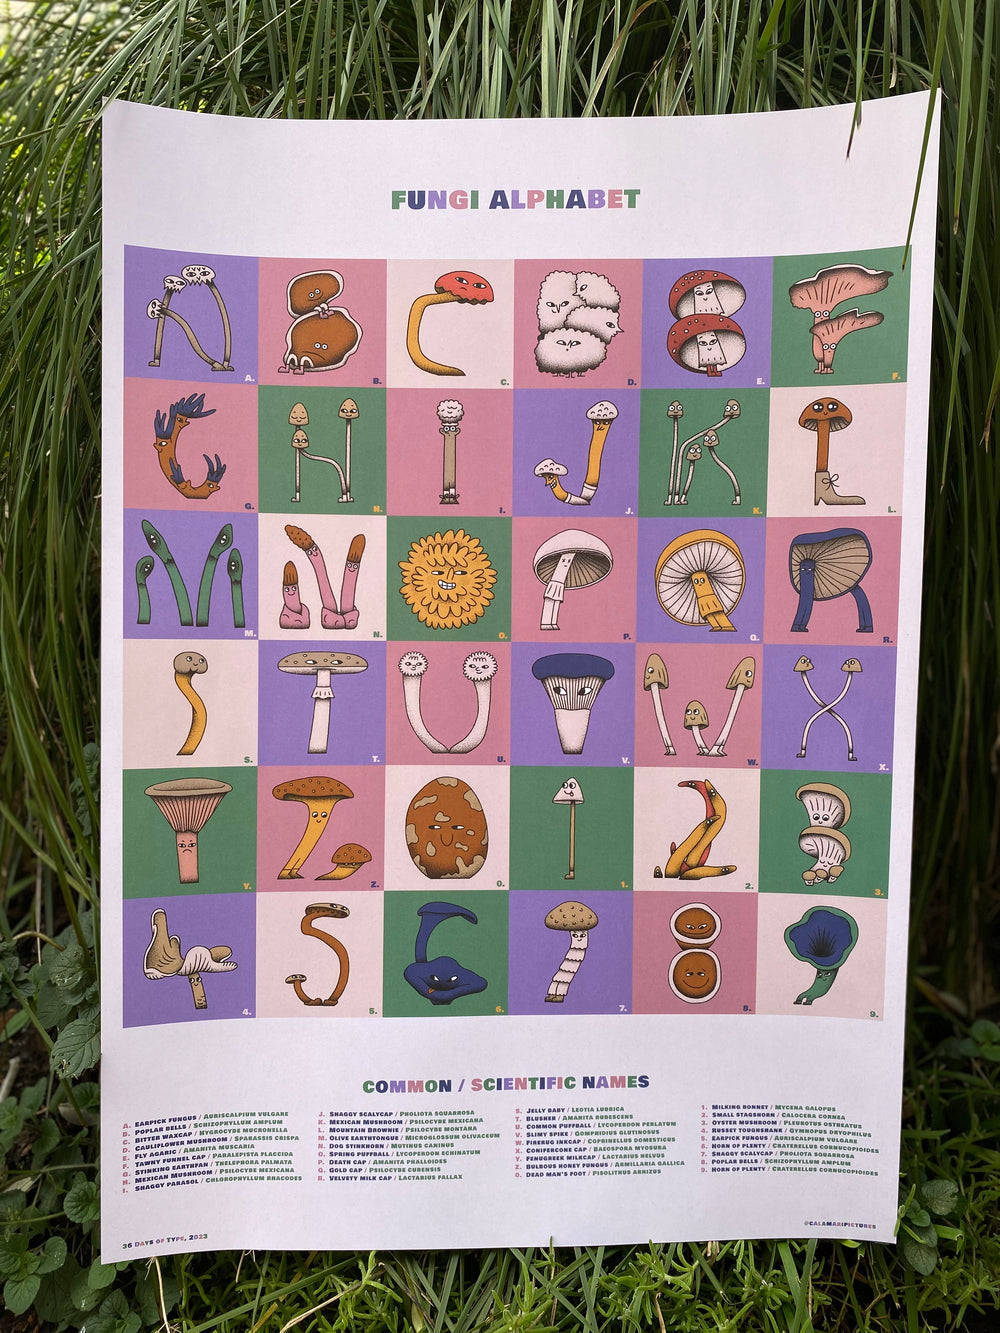 a fun Alphabet  poster with Fungi drawn into letters. Includes common and scientific names of specific fungi 